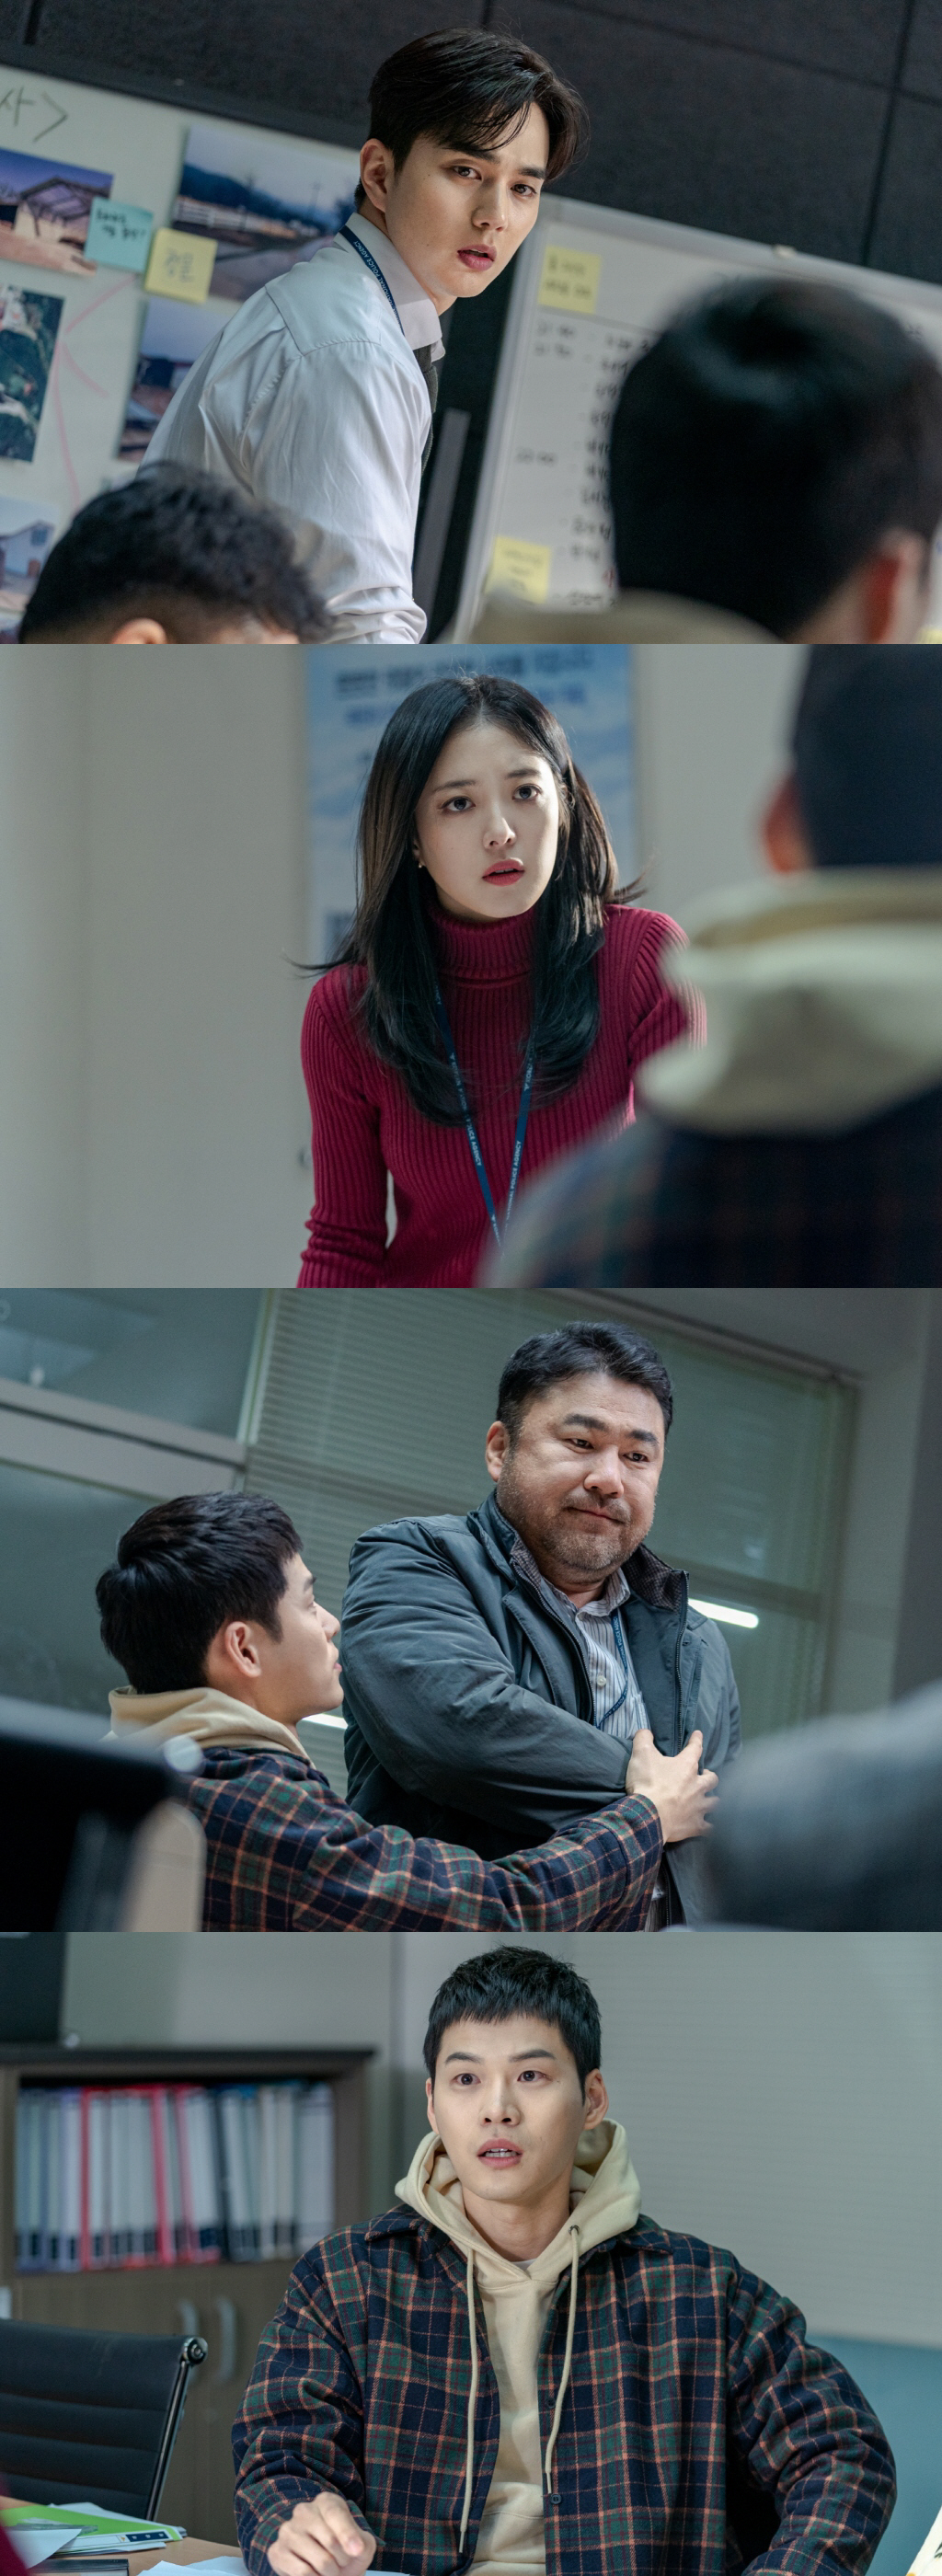 Memoir of Warlist Yoo Seung-ho, Lee Se-young finally join forces.The TVN tree Drama Memoir of Warlist stimulates curiosity on the 17th, foreshadowing the cooperation of Camellia (Yoo Seung-ho) and One lineready (Lee Se-young), who were persistently tracking the May incident in different ways.In the last broadcast, Camellia and One linereadys thrilling brainsex confrontation, which approaches the truth of a serial kidnapping murder in different ways, MemoryScan psychic and profiling, was drawn.The pieces of the incident that were repeatedly reversed here exploded the mystery and gave the extreme immersion.The reversal ending of the shock that Victims Yoon Ye-rim (Kim Ji-in), who made the death penalty escape, is placed in Danger again, gave a breathtaking tension.While the expectation that Camellia and One lineready in the Danger of the day will be able to save the Victims is focused, the photos released on this day are more curious because the meeting of Camellia, Camellia, Koo Chang-tan (Ko Chang-seok), Oh Se-hoon (Yoon Ji-on) and Profiler One lineready is caught.The four people who share clues and gather together to solve the May case. I feel a lot of determination in their eyes and expressions.In the third and fourth episodes broadcast this week, Susa is rushed to the perfect coordination of the four people who have united to save Victims.Camellia, who sensed the strangeness of the news that Susa University had caught the real crime, and One lineready, who persistently pursues the case based on effective initial profiling.It stimulates curiosity about what truths are waiting for those who do not give up until the end.Above all, it is noteworthy how the cooperation between Camellia and One lineready, which is never likely to match, will unfold.Memoir of Warlist production team said, Camellia and One line already finally start working together.It is good to expect the clues that Camellia found with the memory scan psychic ability, the information obtained by the Camellia Girls through the inquiry Susa, and the one lineready that matches this scattered piece. Watch who is the perpetrator of the May case and what truth is hidden.Meanwhile, the third episode of TVNs Drama Memoir of Warlist will be broadcast tomorrow (18th) at 10:50 pm.